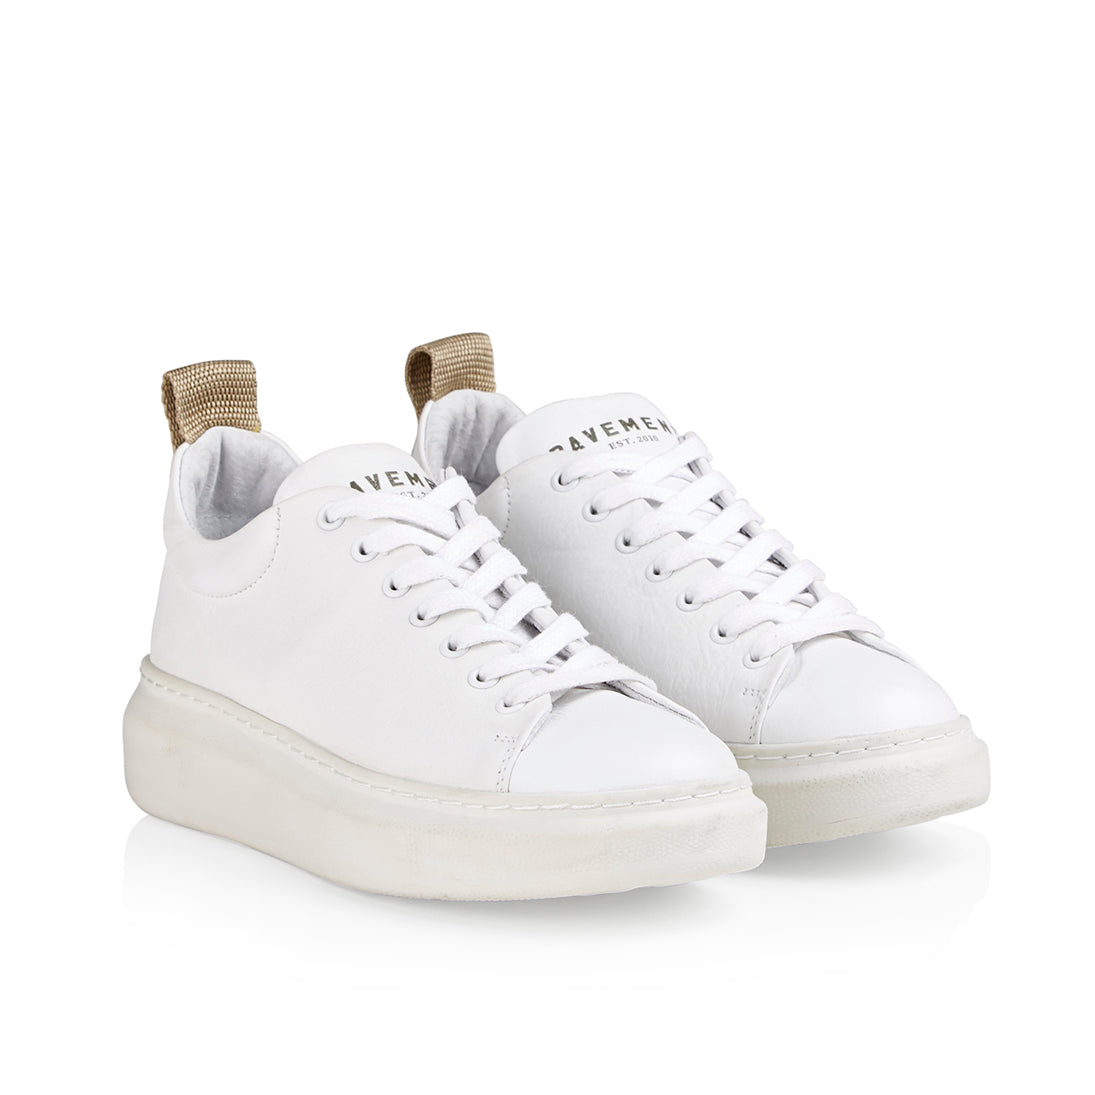 Pavement Dee color Sneakers White/beige 452